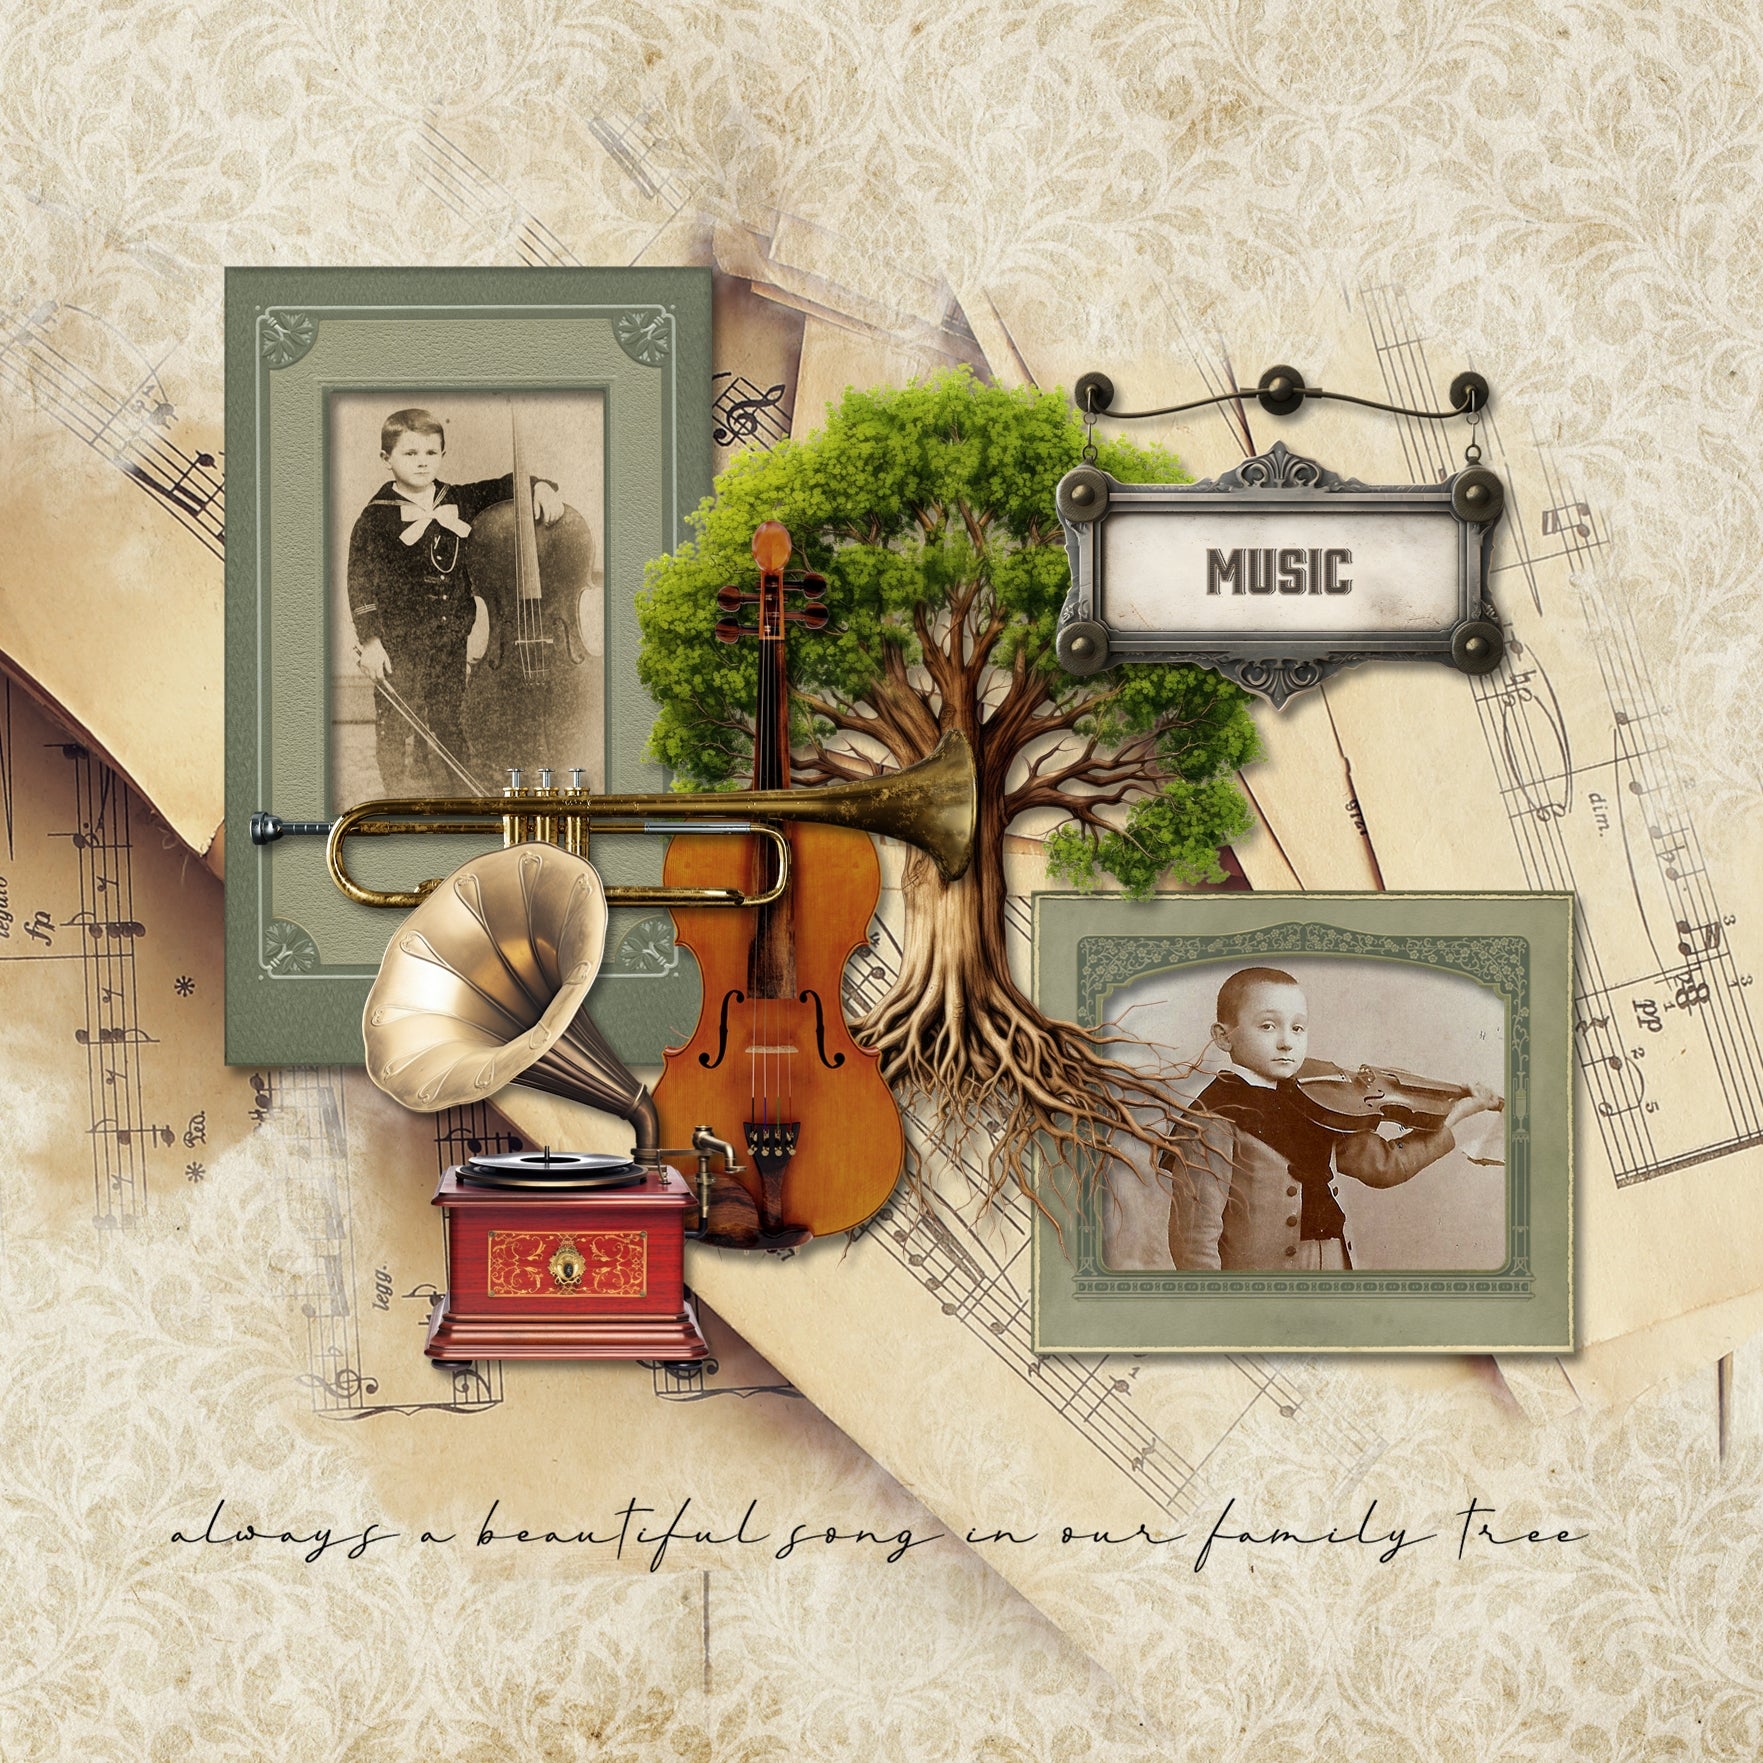 Great for genealogy and family history albums and keepsake digital art pages, these beautiful vintage overlays with transparent edges by Lucky Girl Creative blend seamlessly into any background paper and make the perfect backdrop for authentic scrapbook pages. Topics include books, music, vintage objects, and photographs.